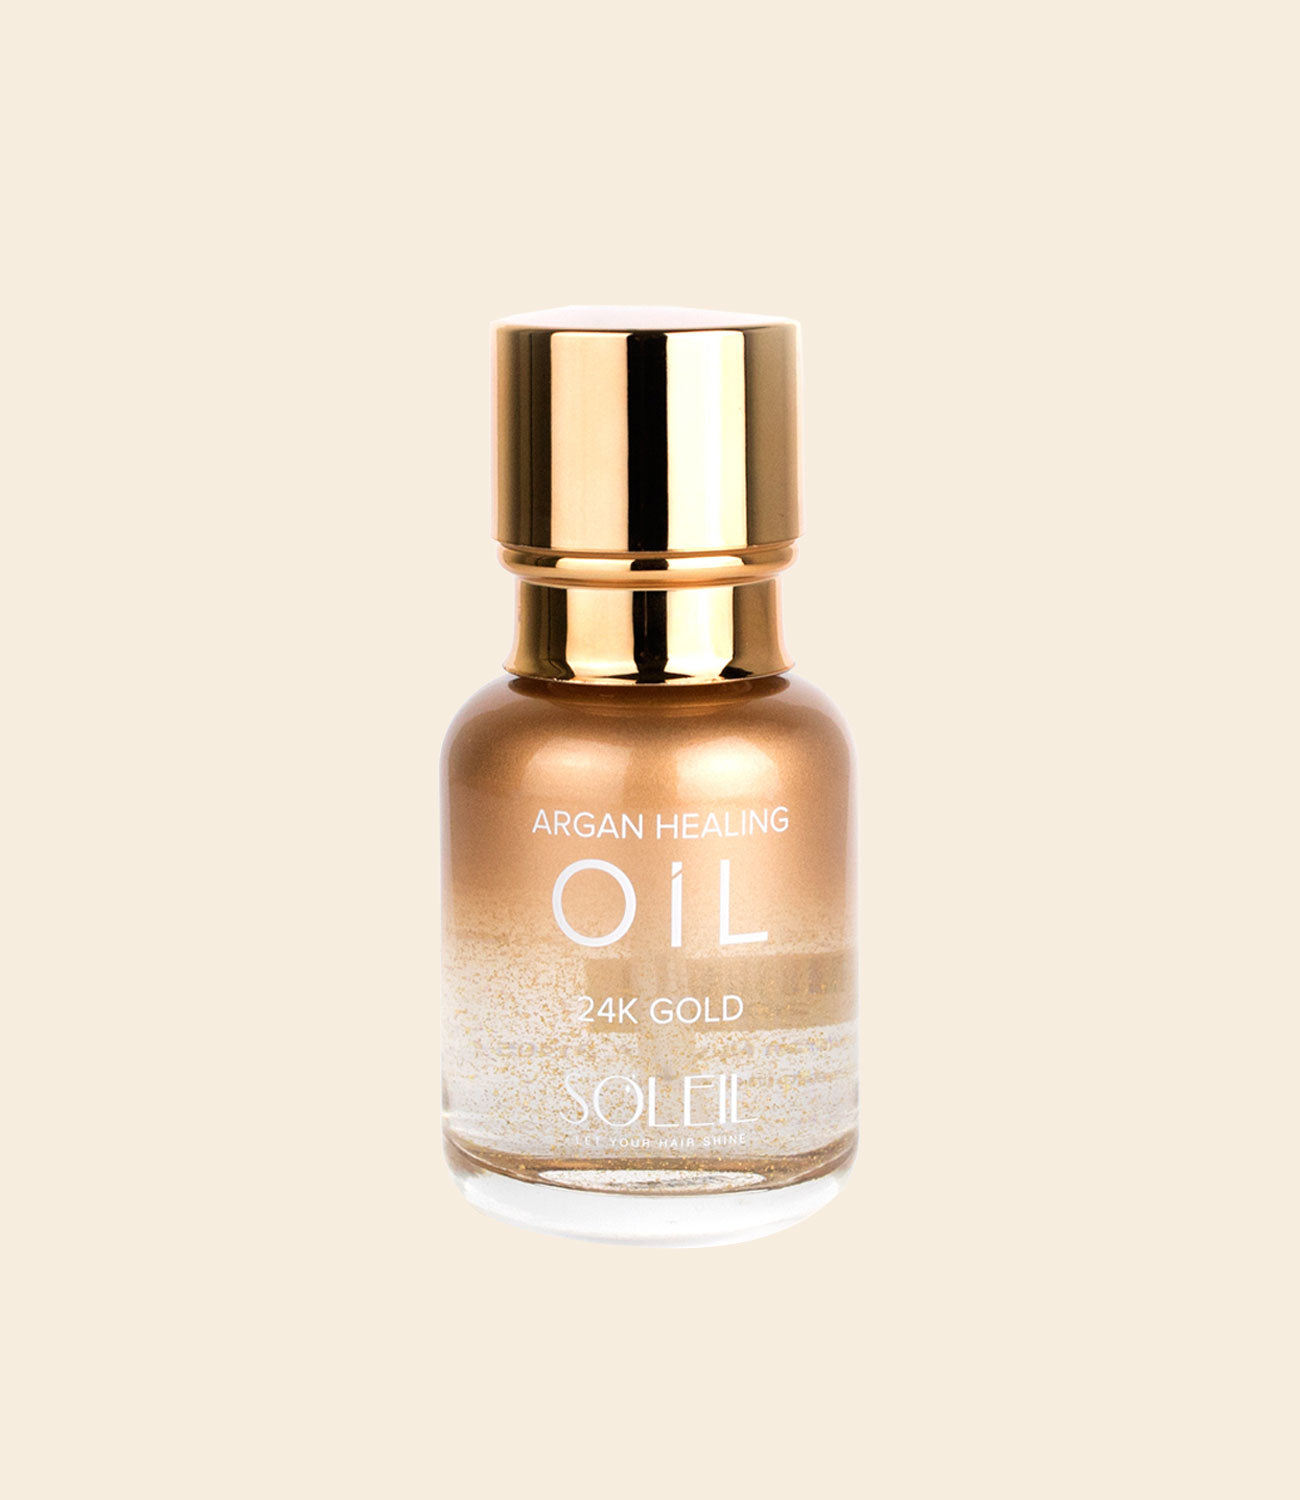 soleil argan healing oil 24k gold packaging with a gold lid anda glass half translucent and half rose gold gradient against light beige background